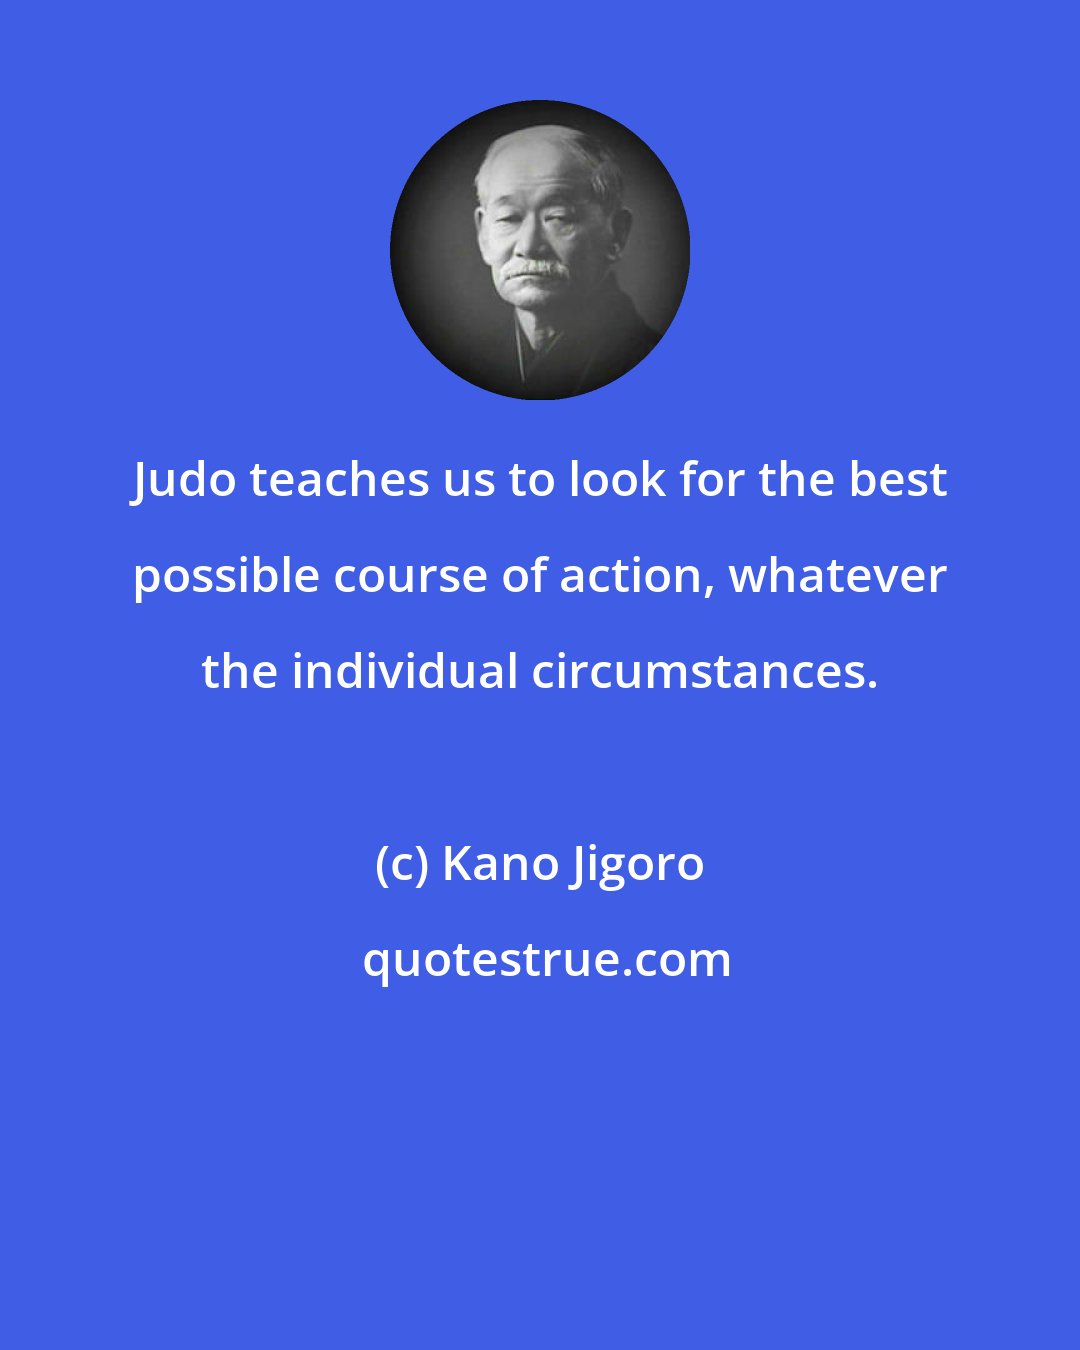 Kano Jigoro: Judo teaches us to look for the best possible course of action, whatever the individual circumstances.